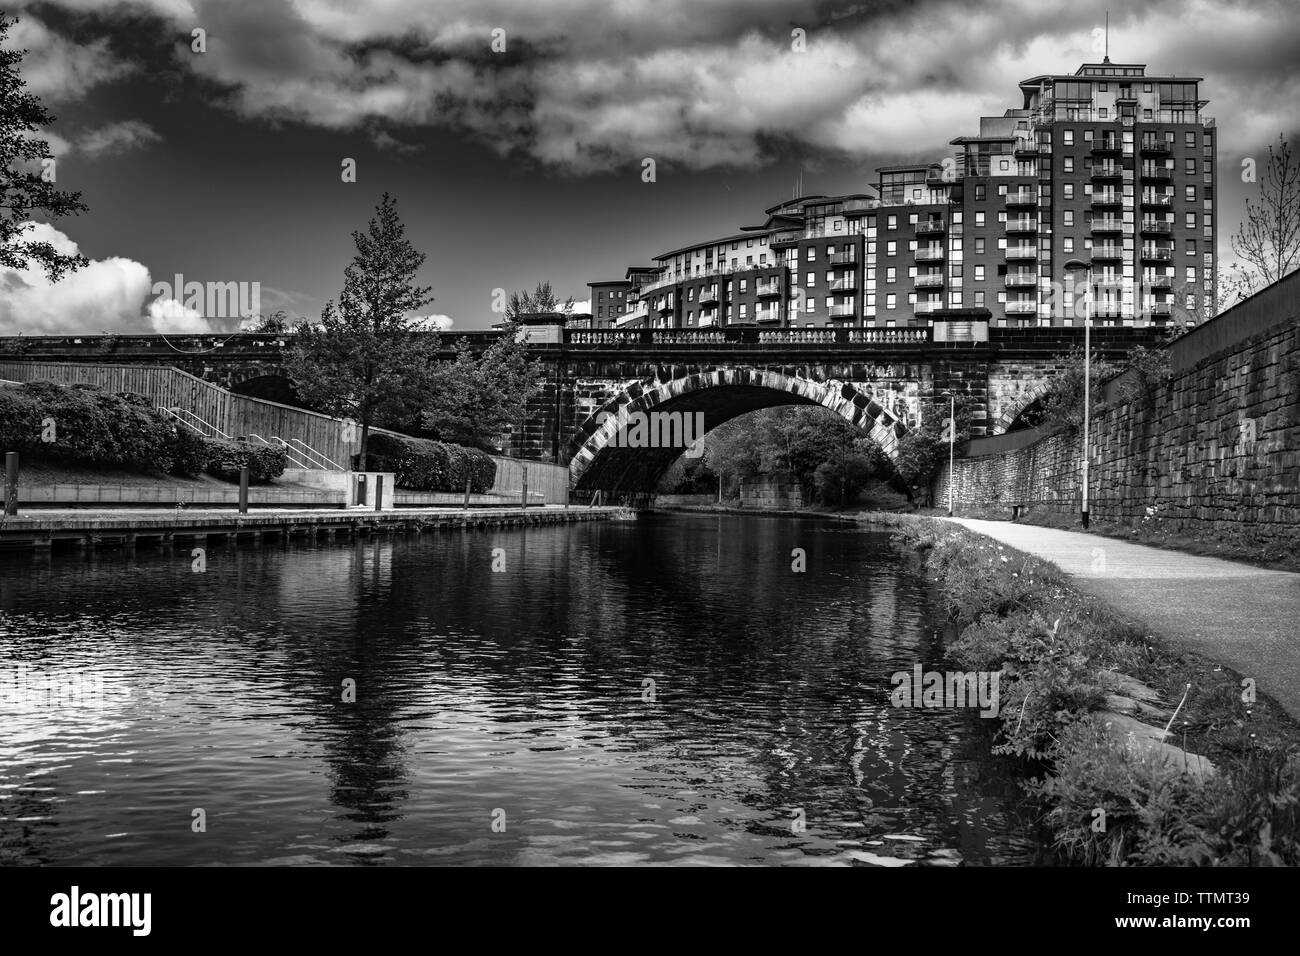 The River Aire in Leeds, Yorkshire. collection of colour + black and white images Stock Photo